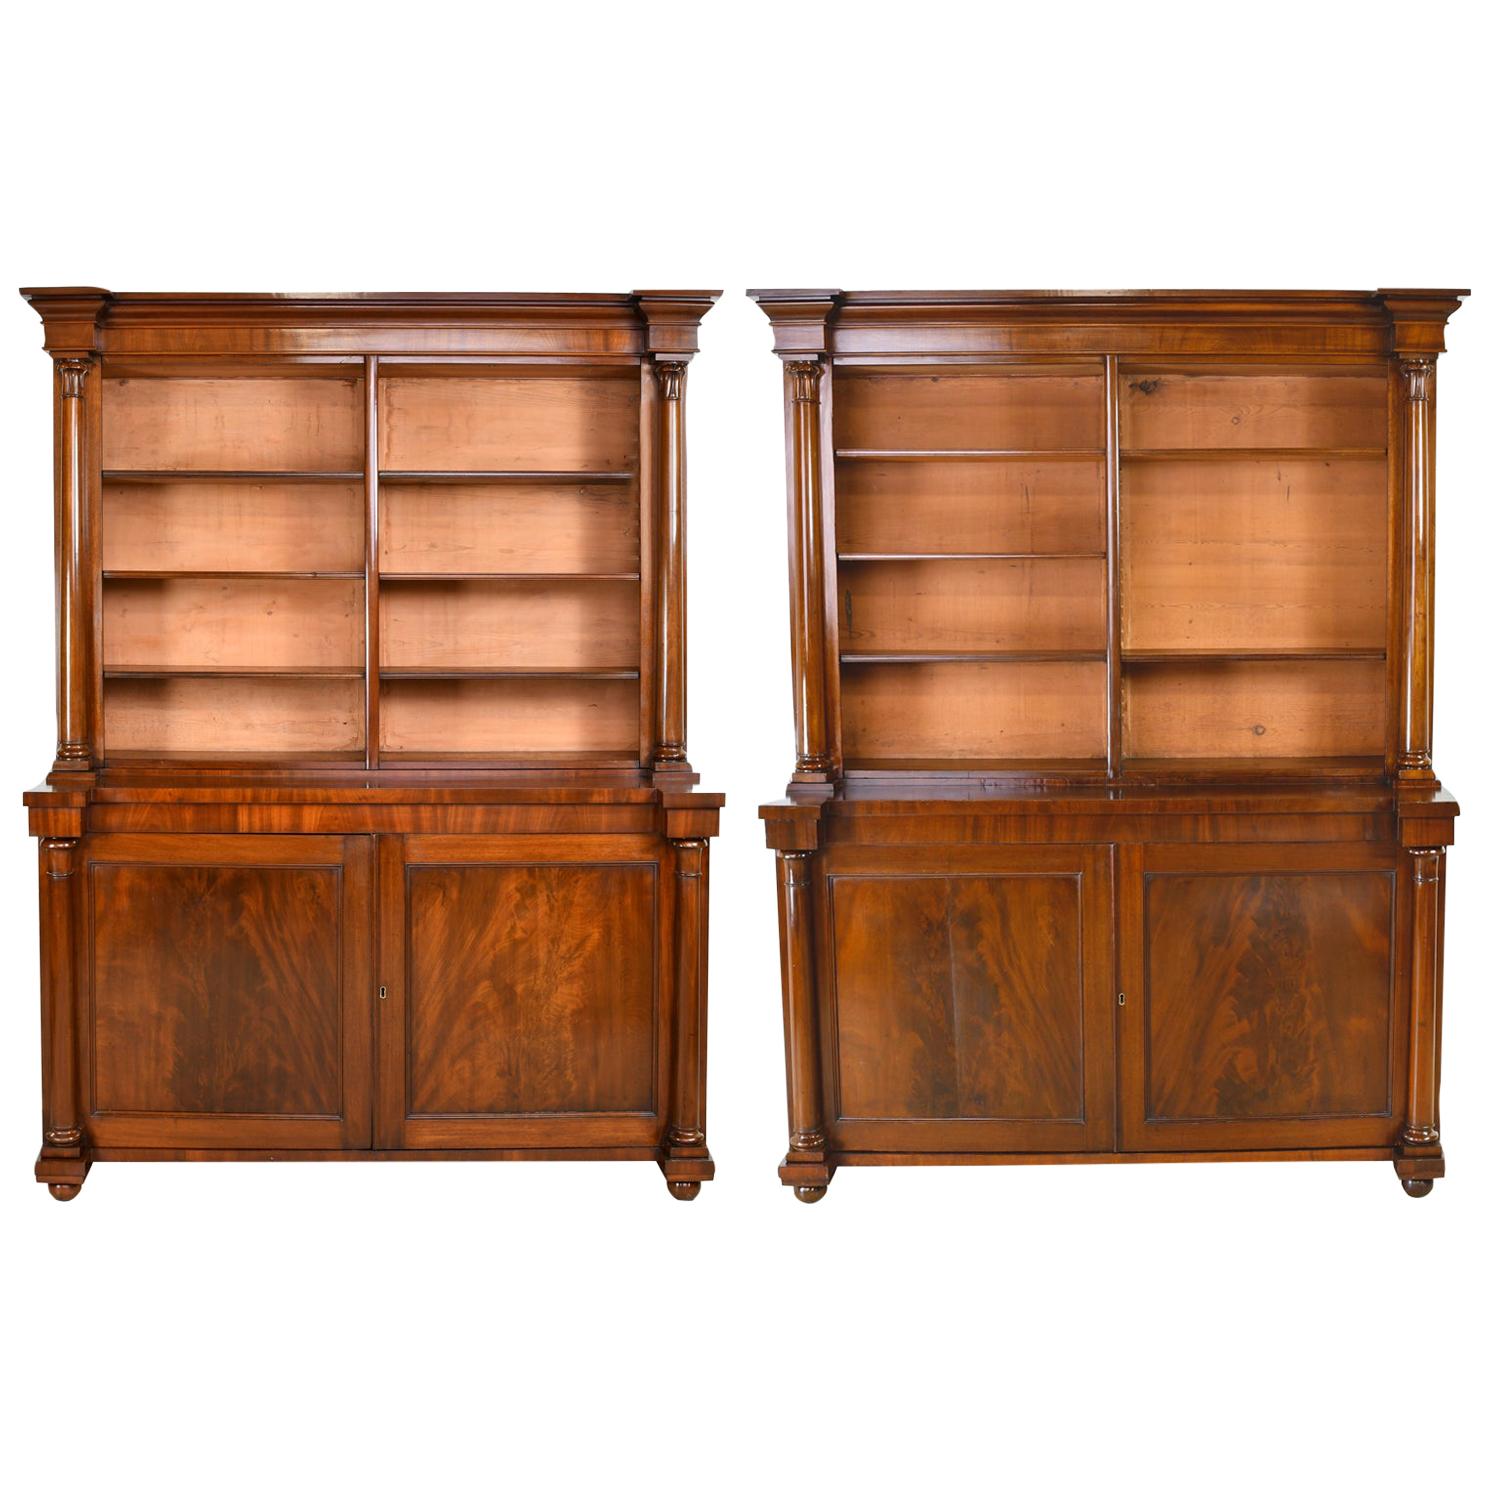 Pair of Large William IV Bookcases in West Indies Mahogany, England, circa 1830